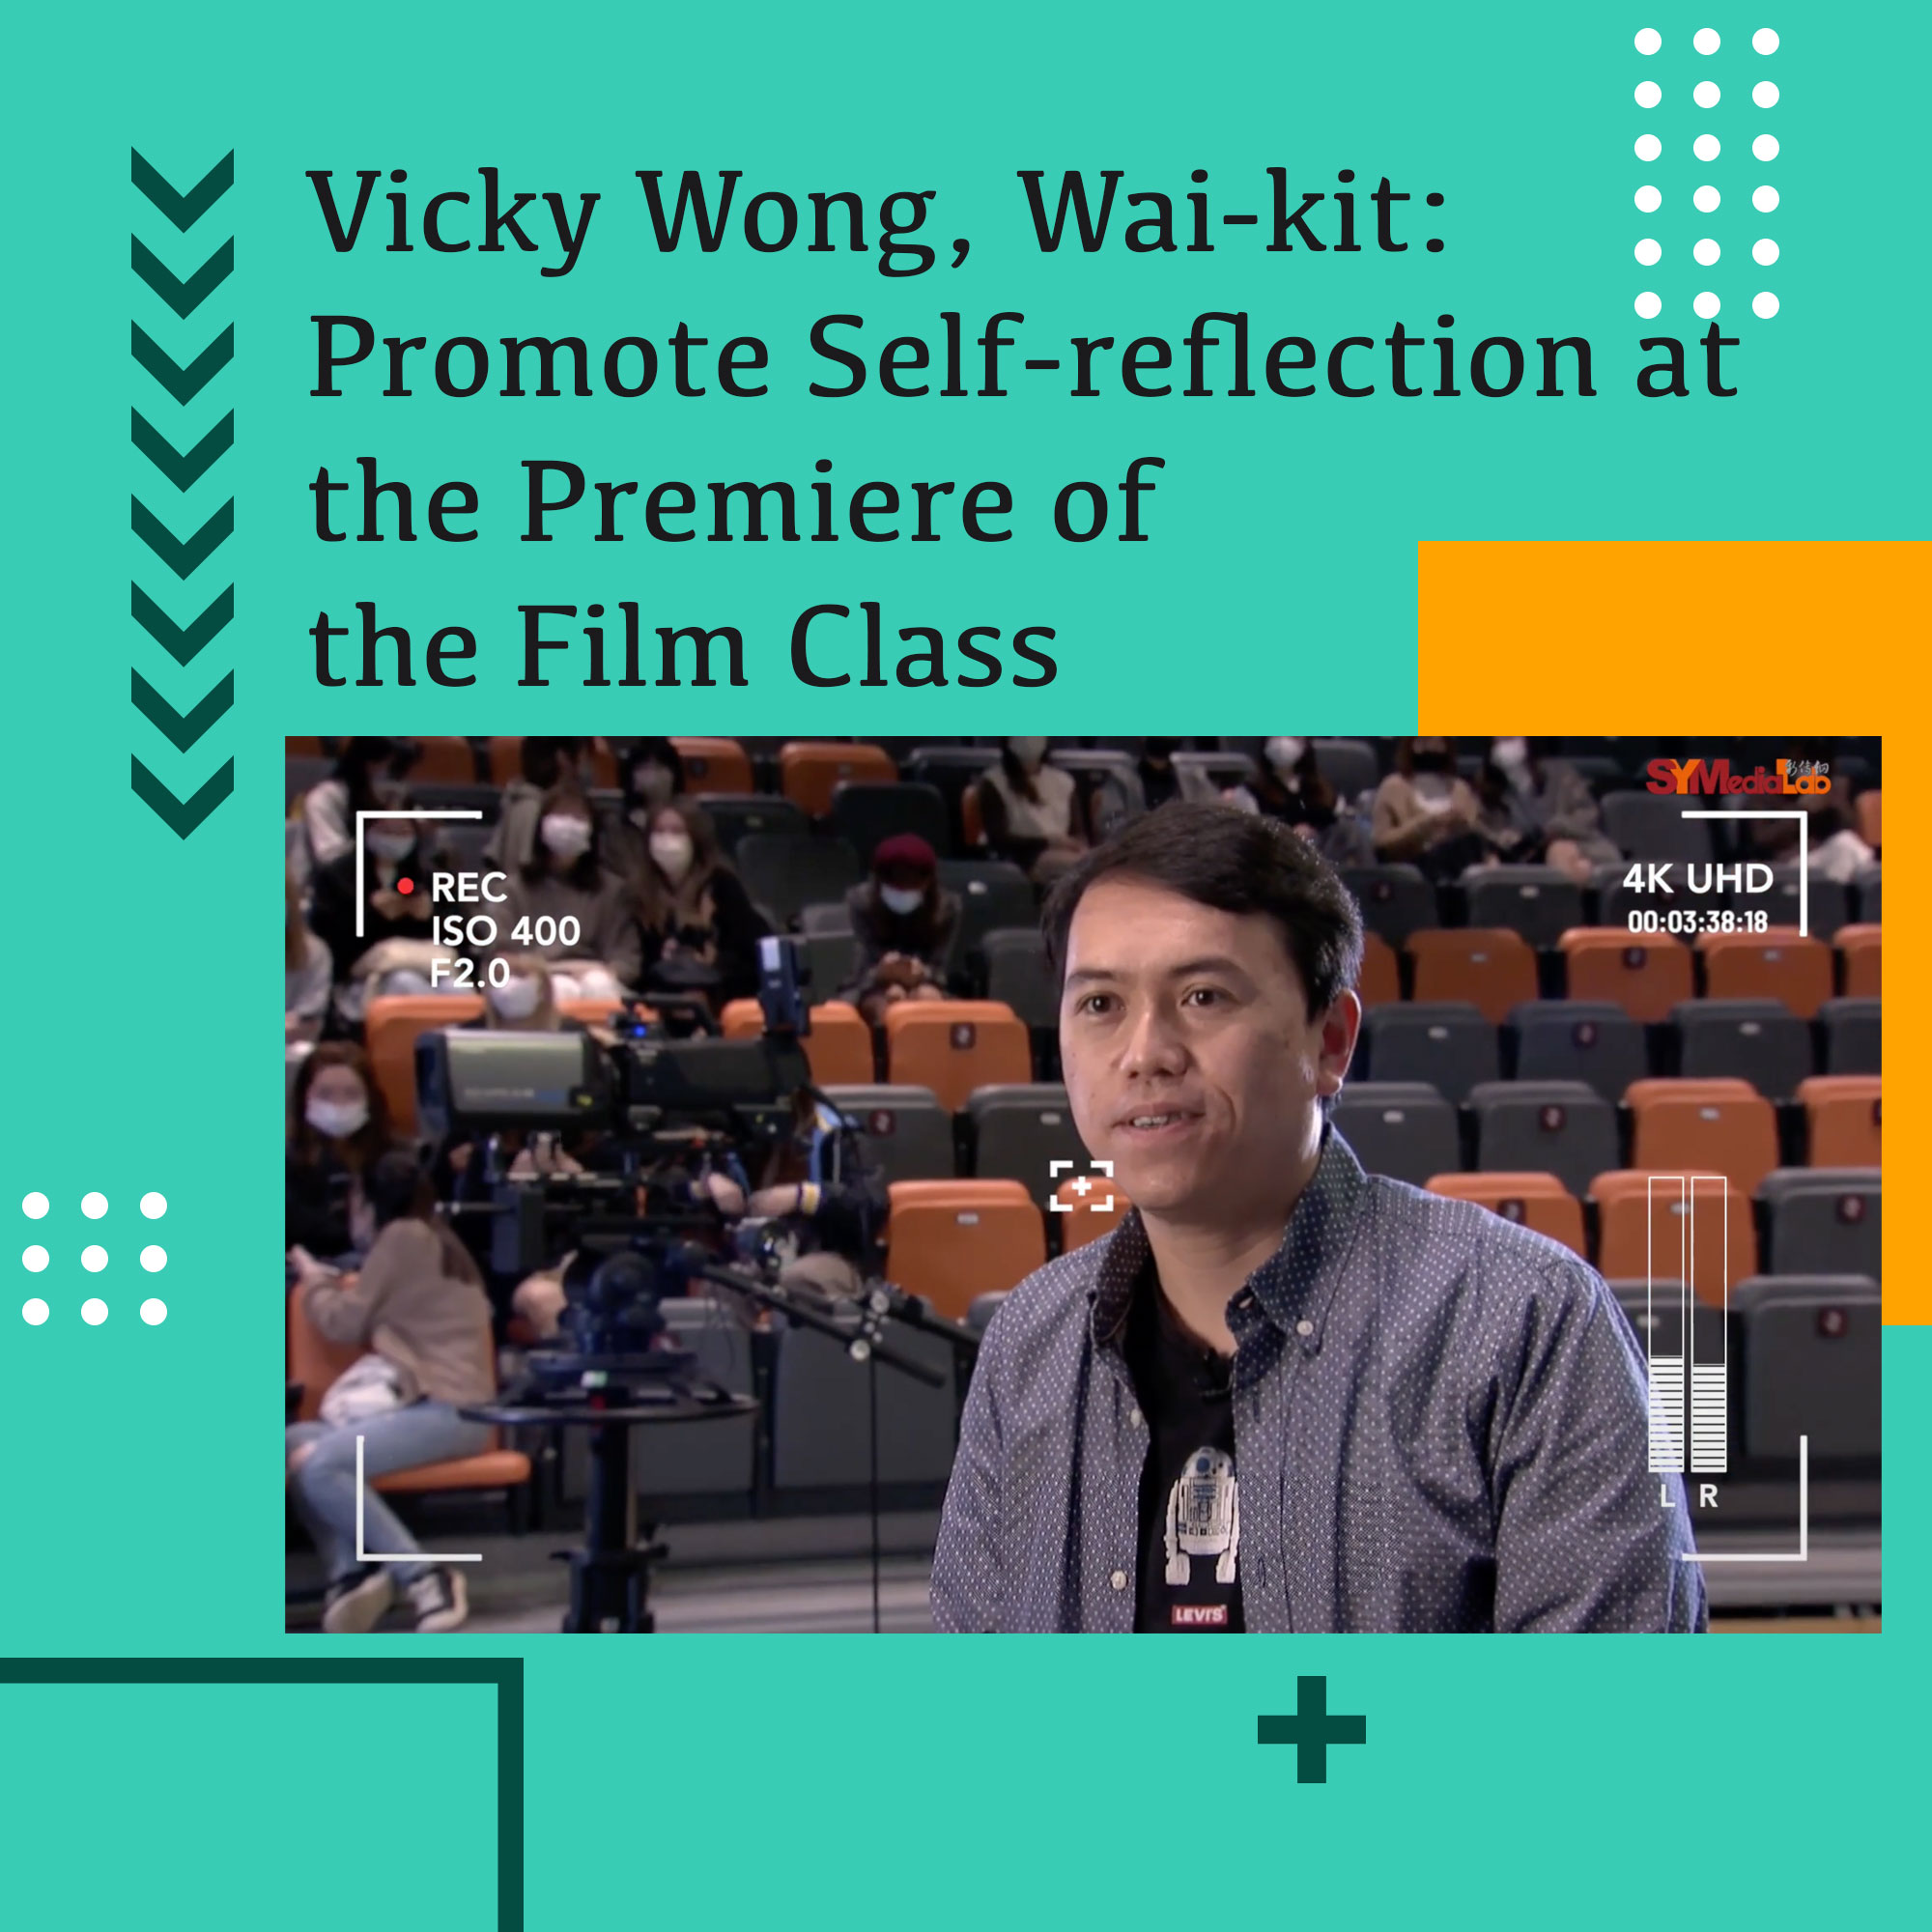 Vicky Wong, Wai-kit: Promote Self-reflection at the Premiere of the Film Class